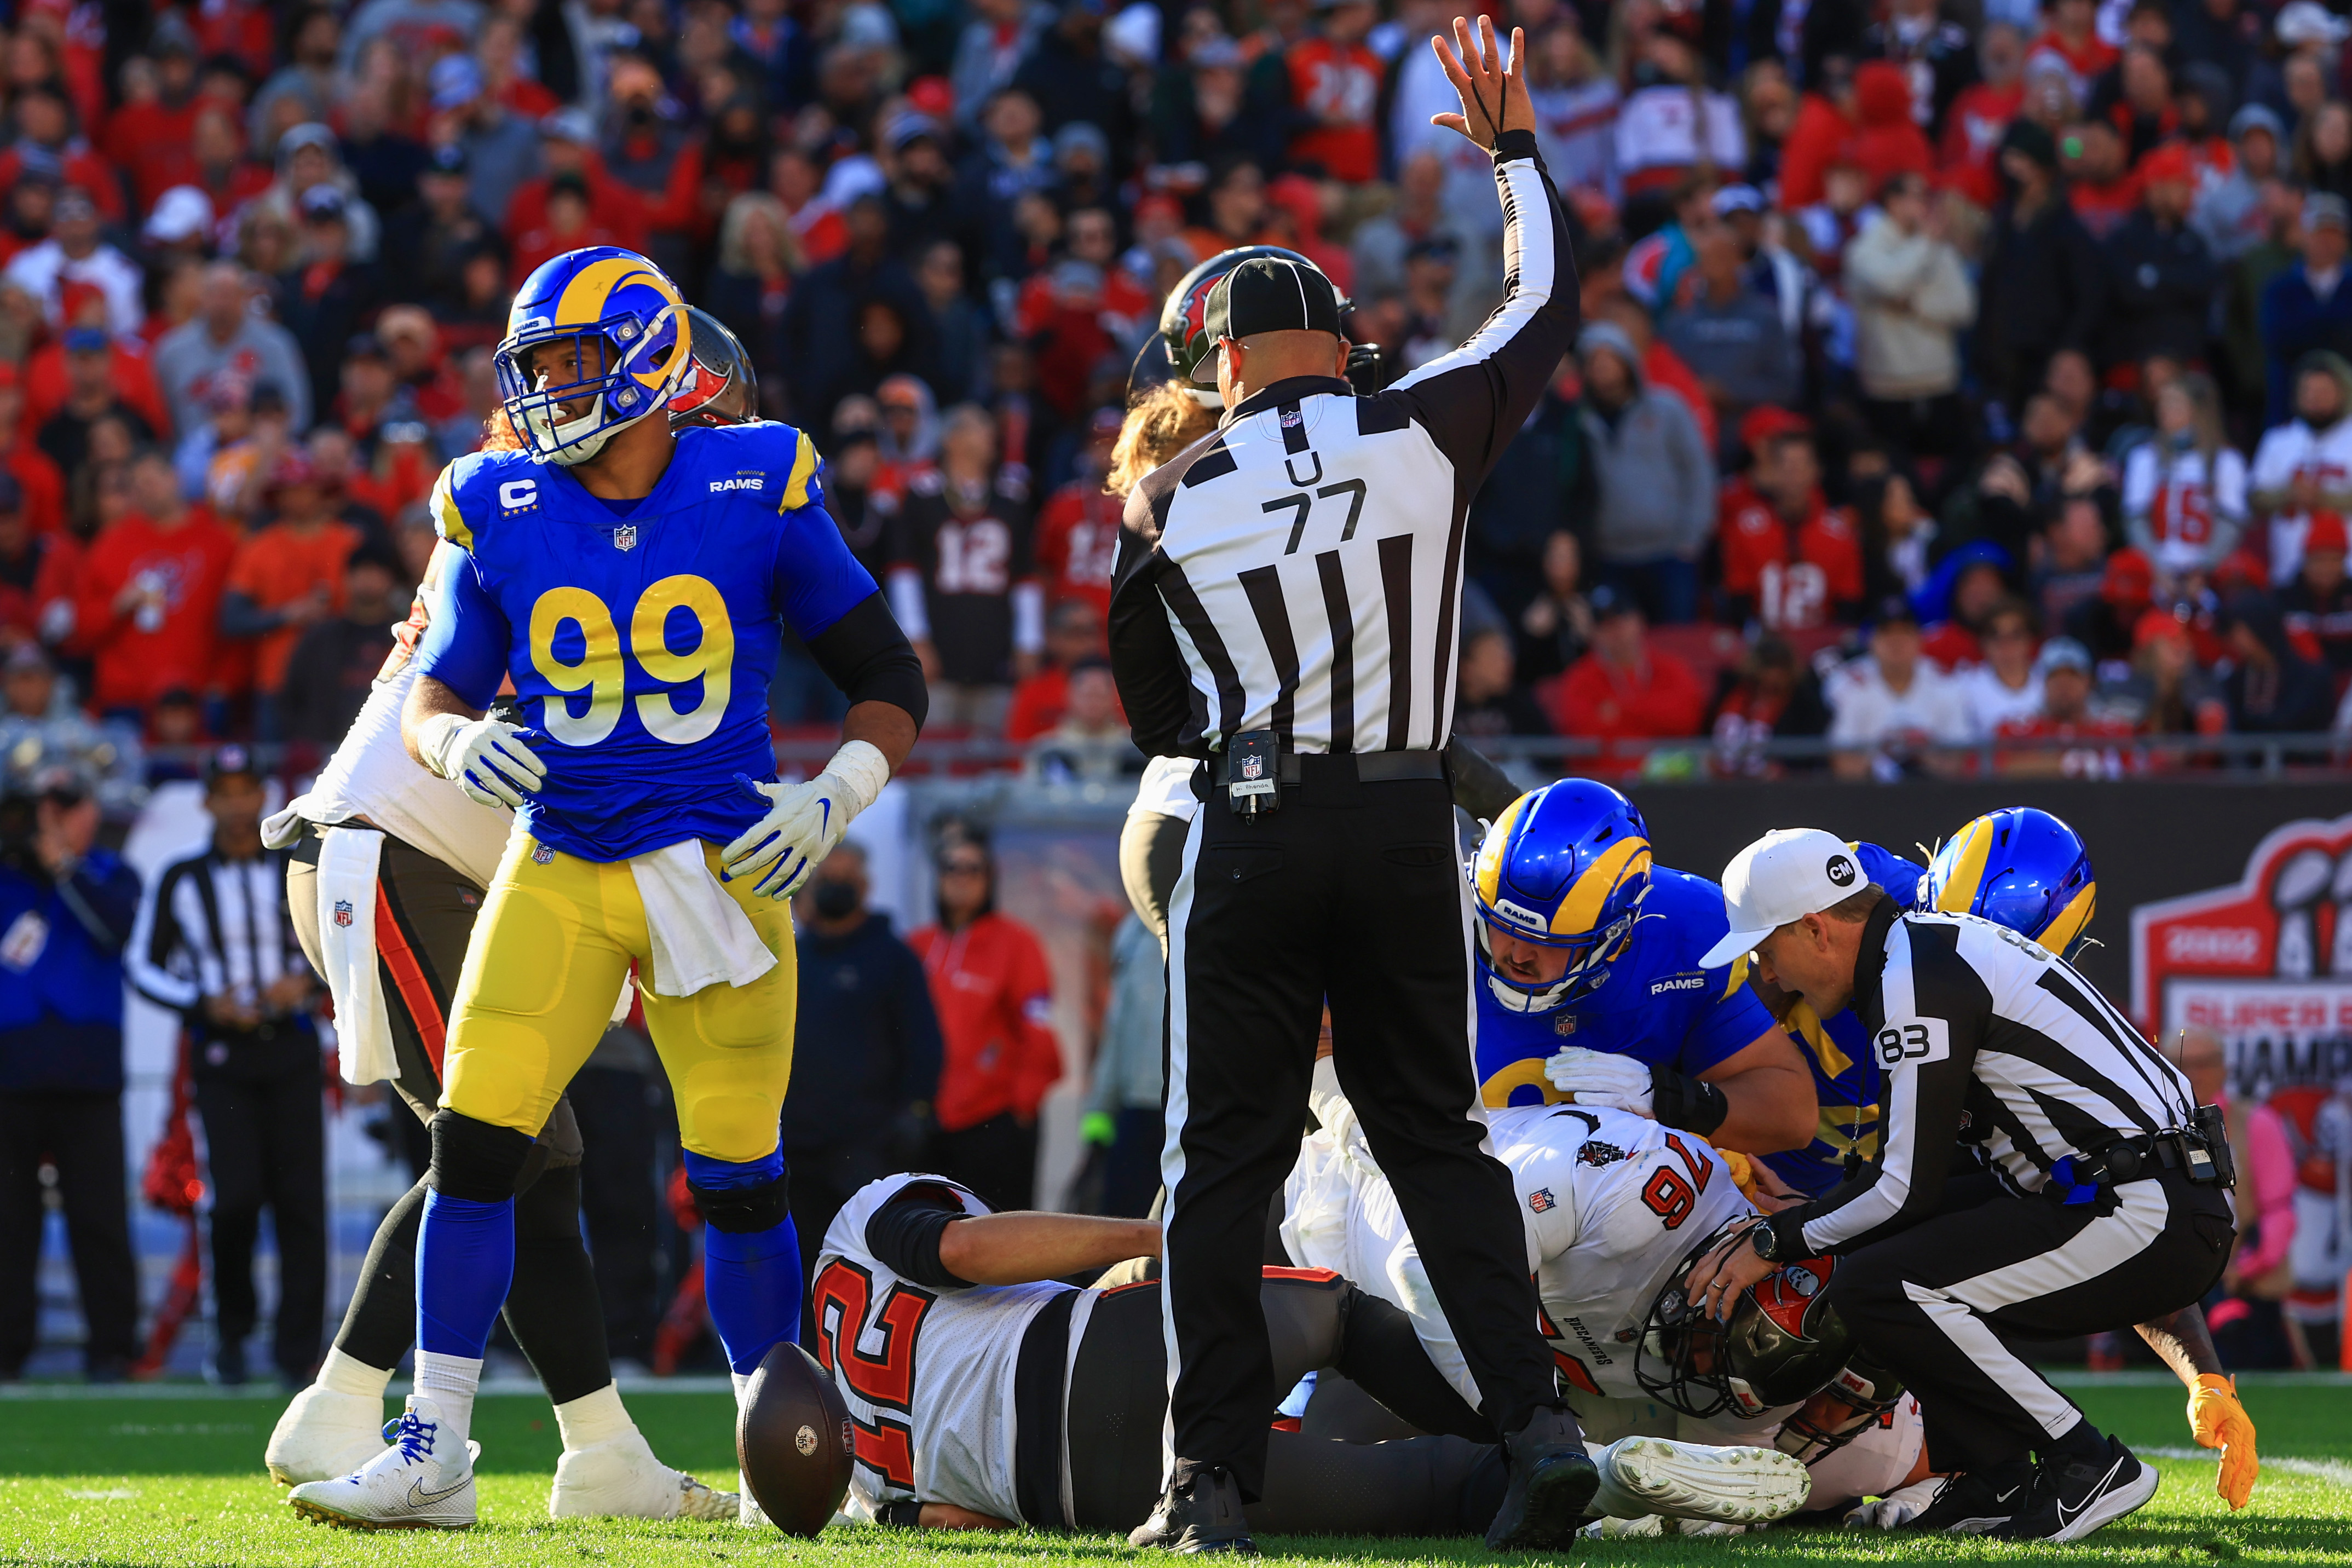 TAMPA, FLORIDA - JANUARY 23: Aaron Donald #99 of the Los Angeles Rams reacts after sacking Tom Brady #12 of the Tampa Bay Buccaneers in the second quarter in the NFC Divisional Playoff game at Raymond James Stadium on January 23, 2022 in Tampa, Florida.  (Photo by Mike Ehrmann/Getty Images)